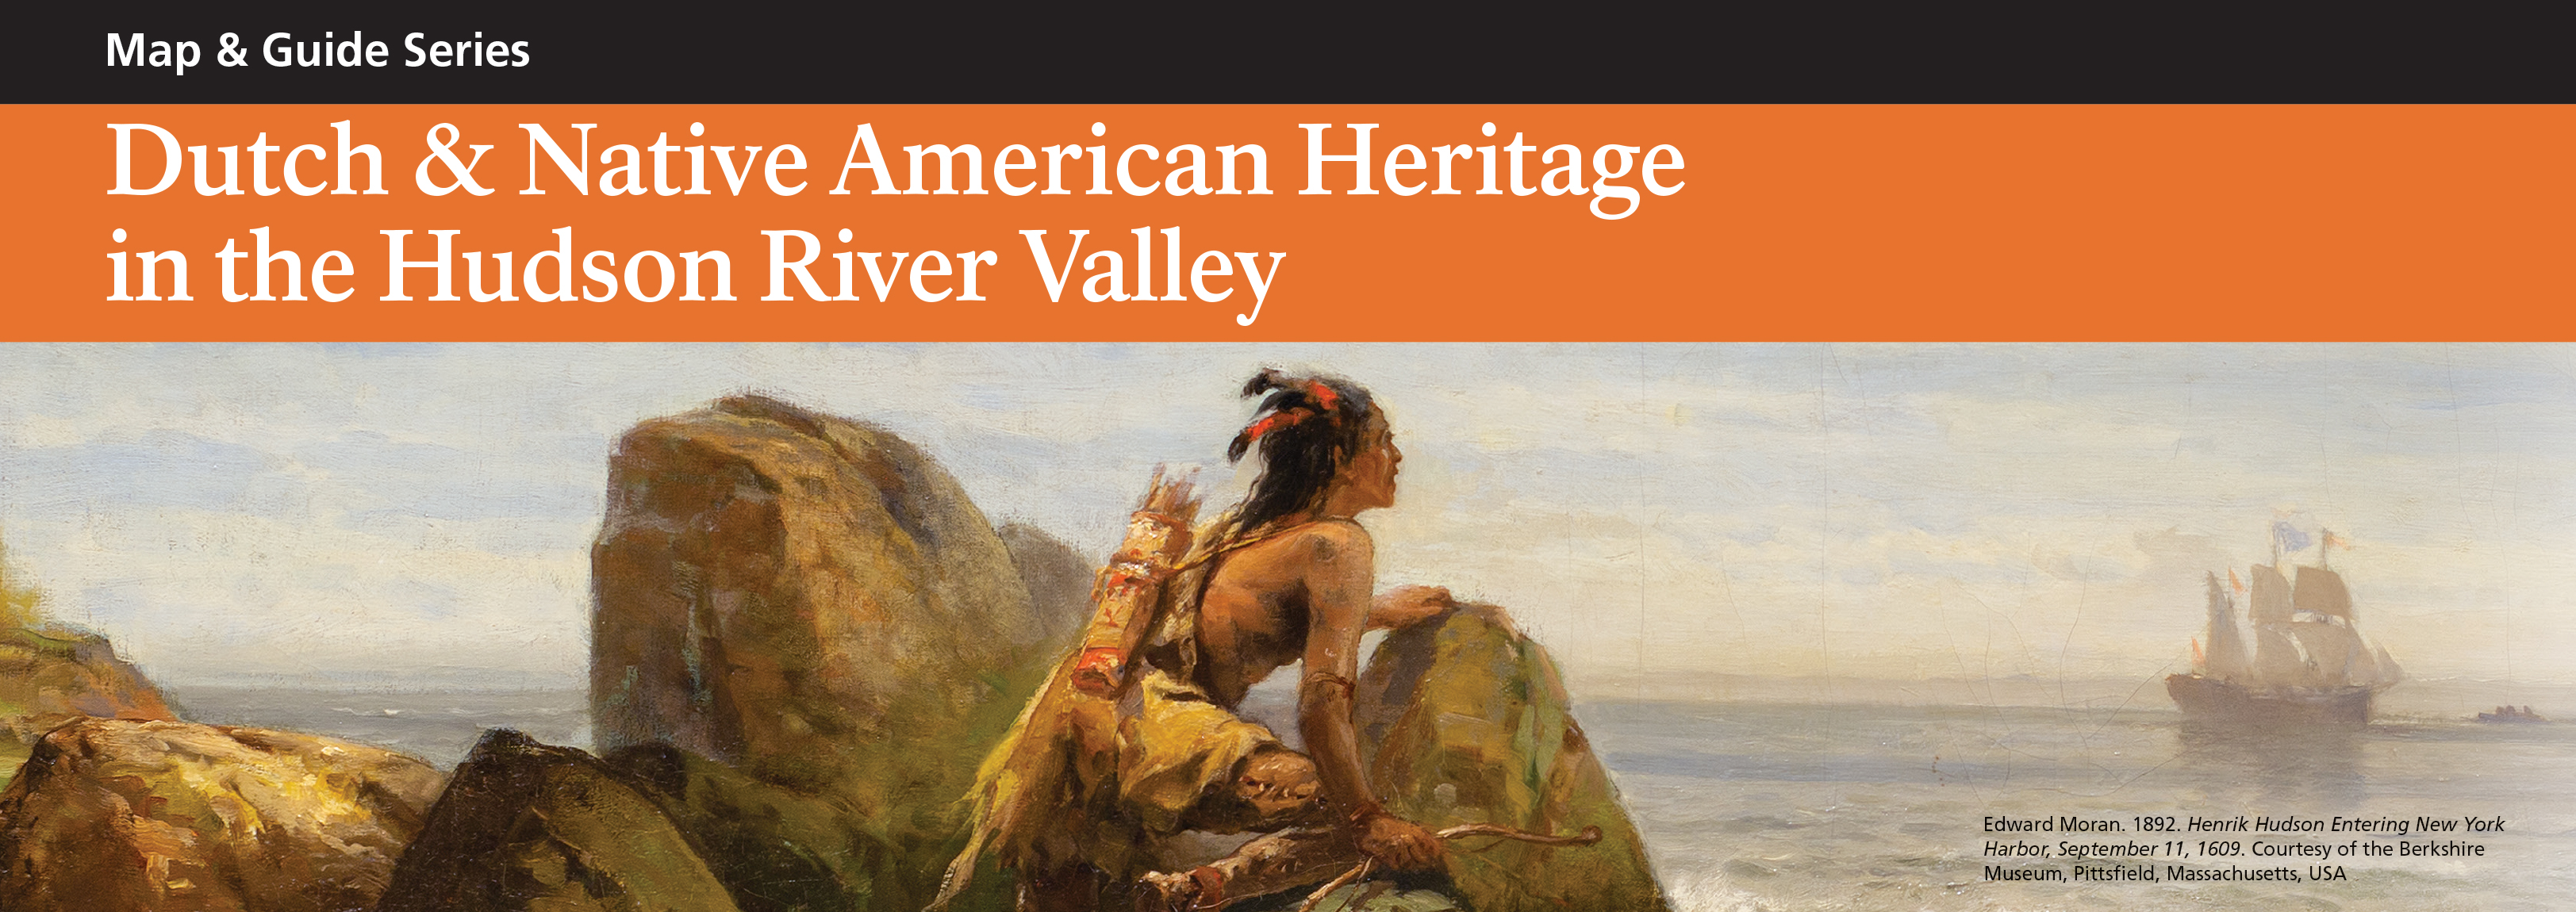 Dutch and Native American Heritage in the Hudson River Valley